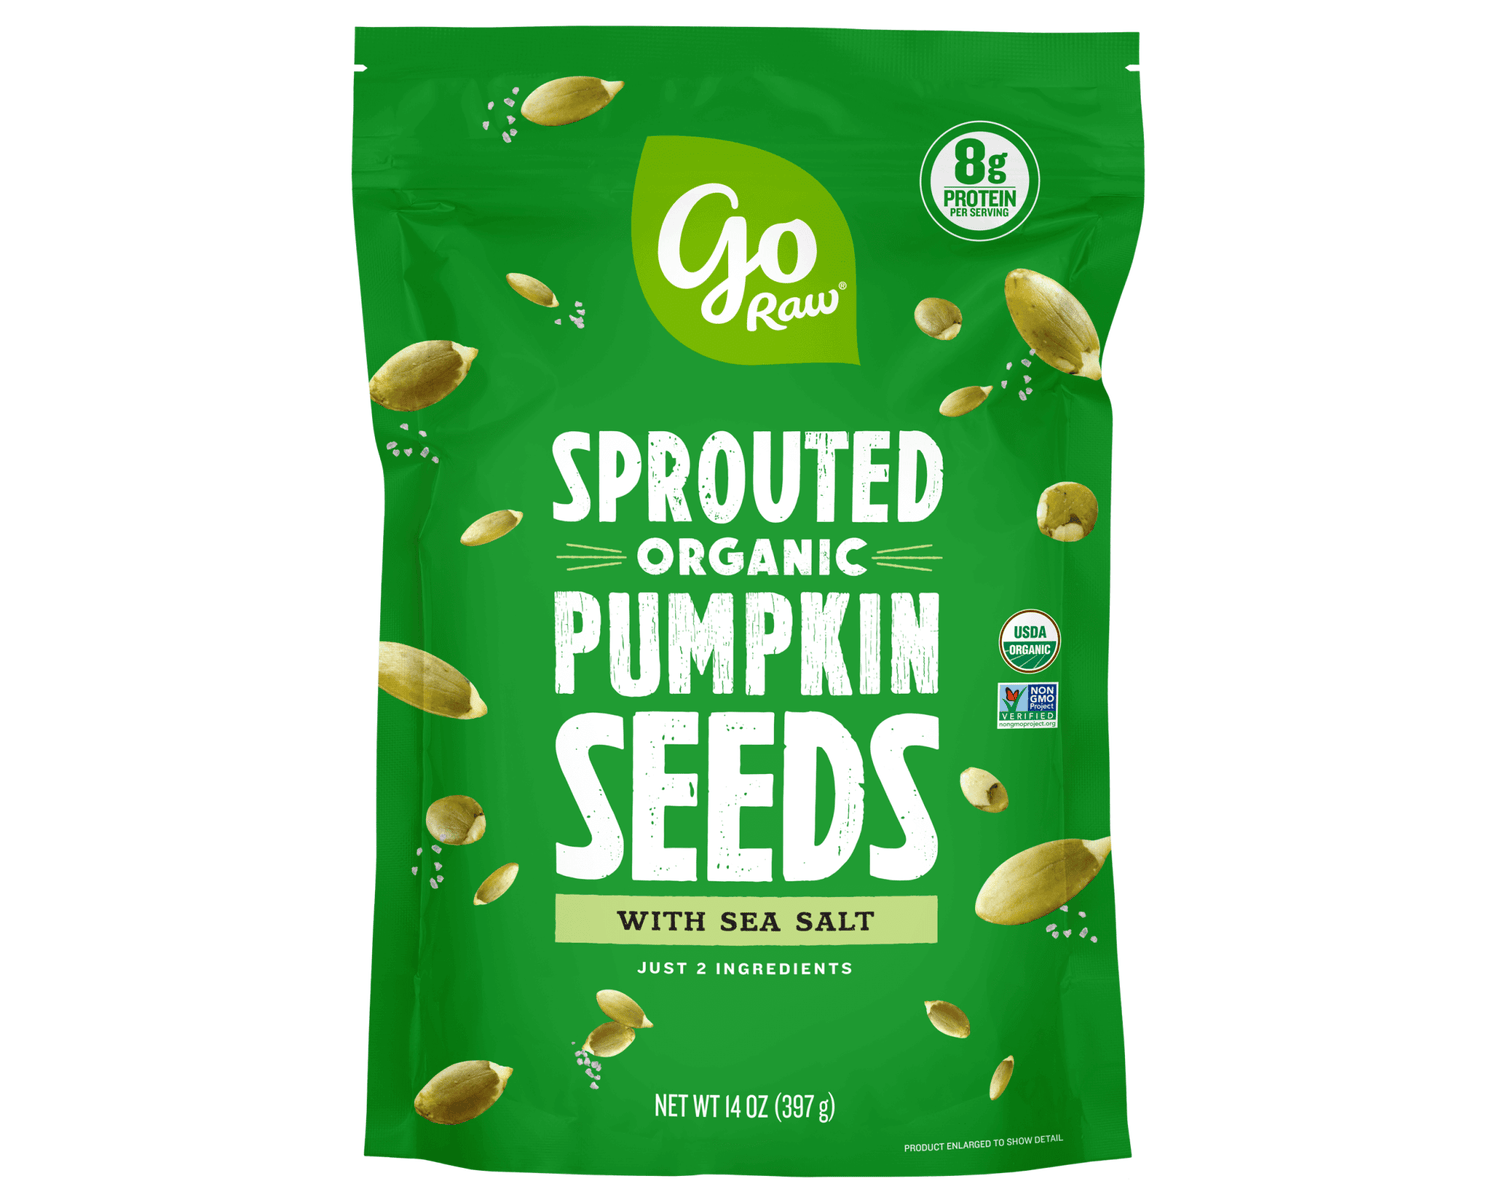 Go Raw Sprouted Pumpkin Seeds with 8g plant-based protein